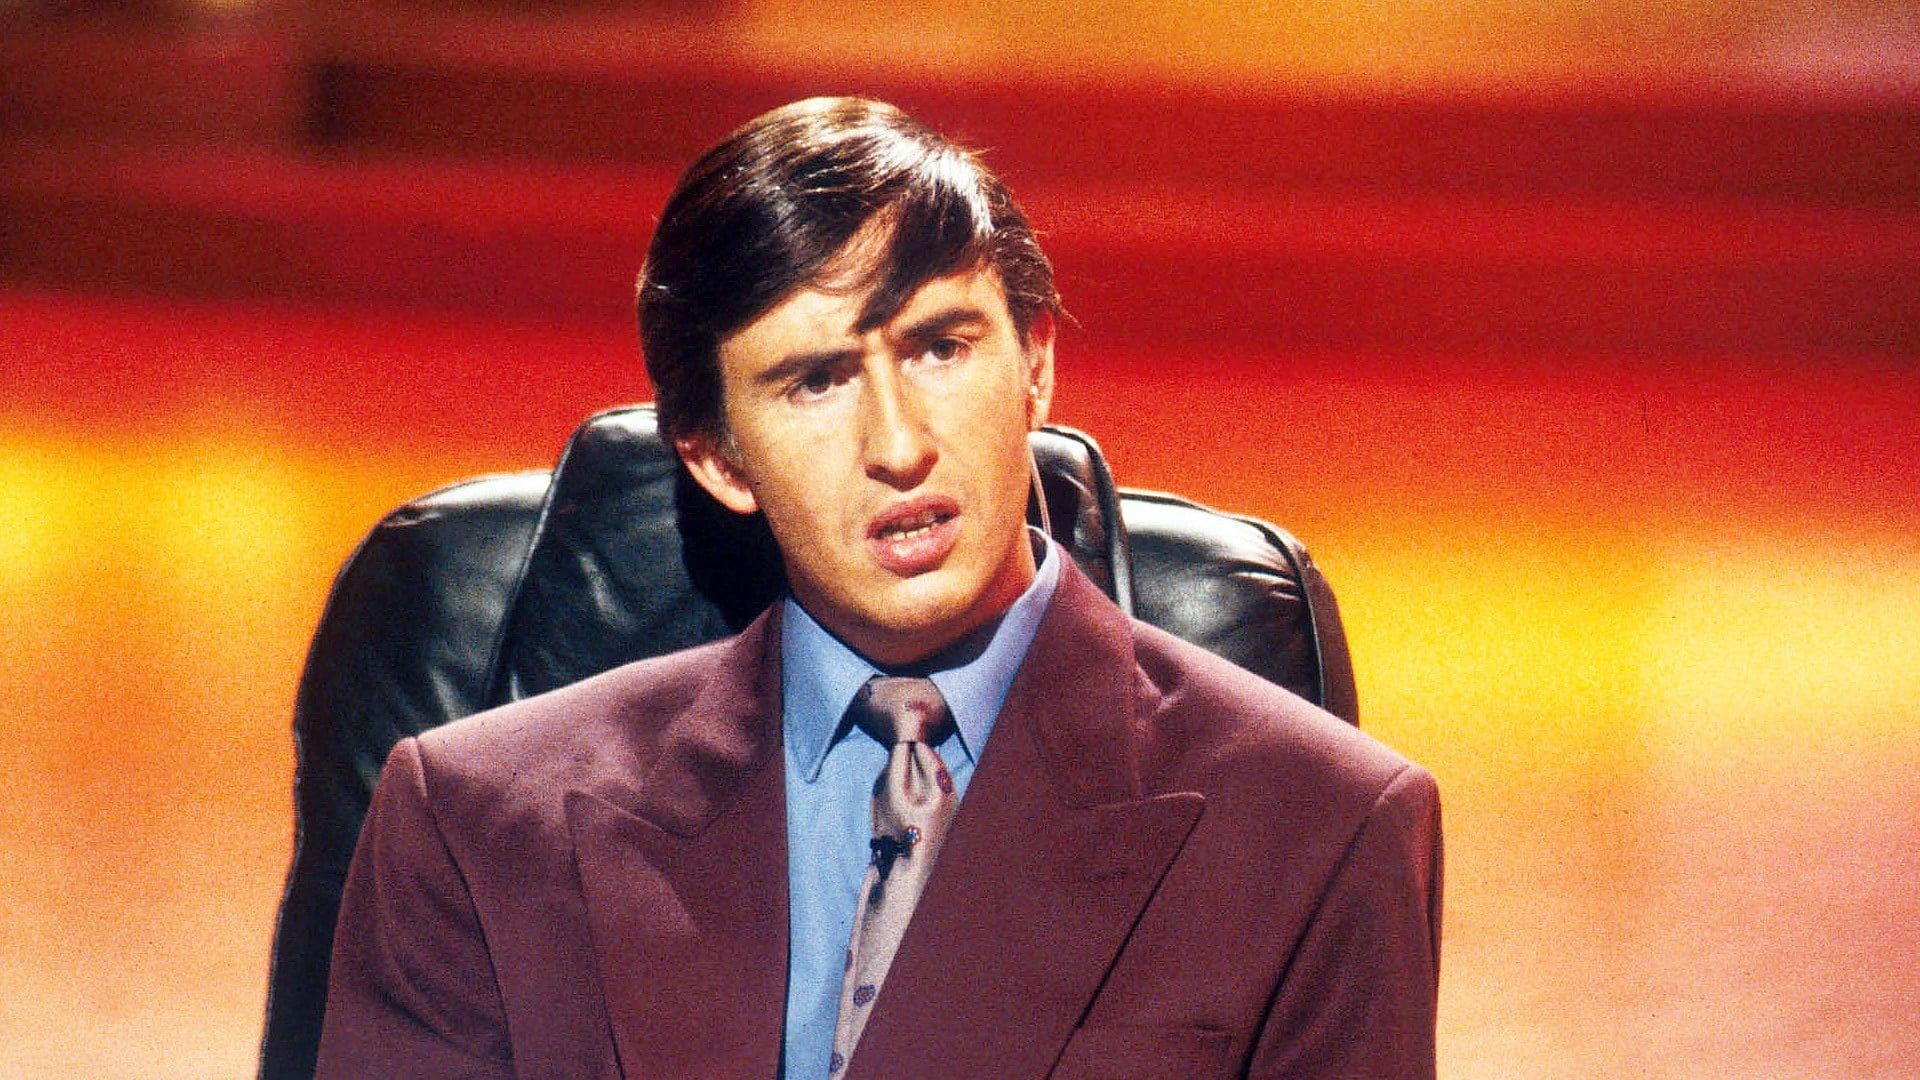 Knowing Me, Knowing You with Alan Partridge background